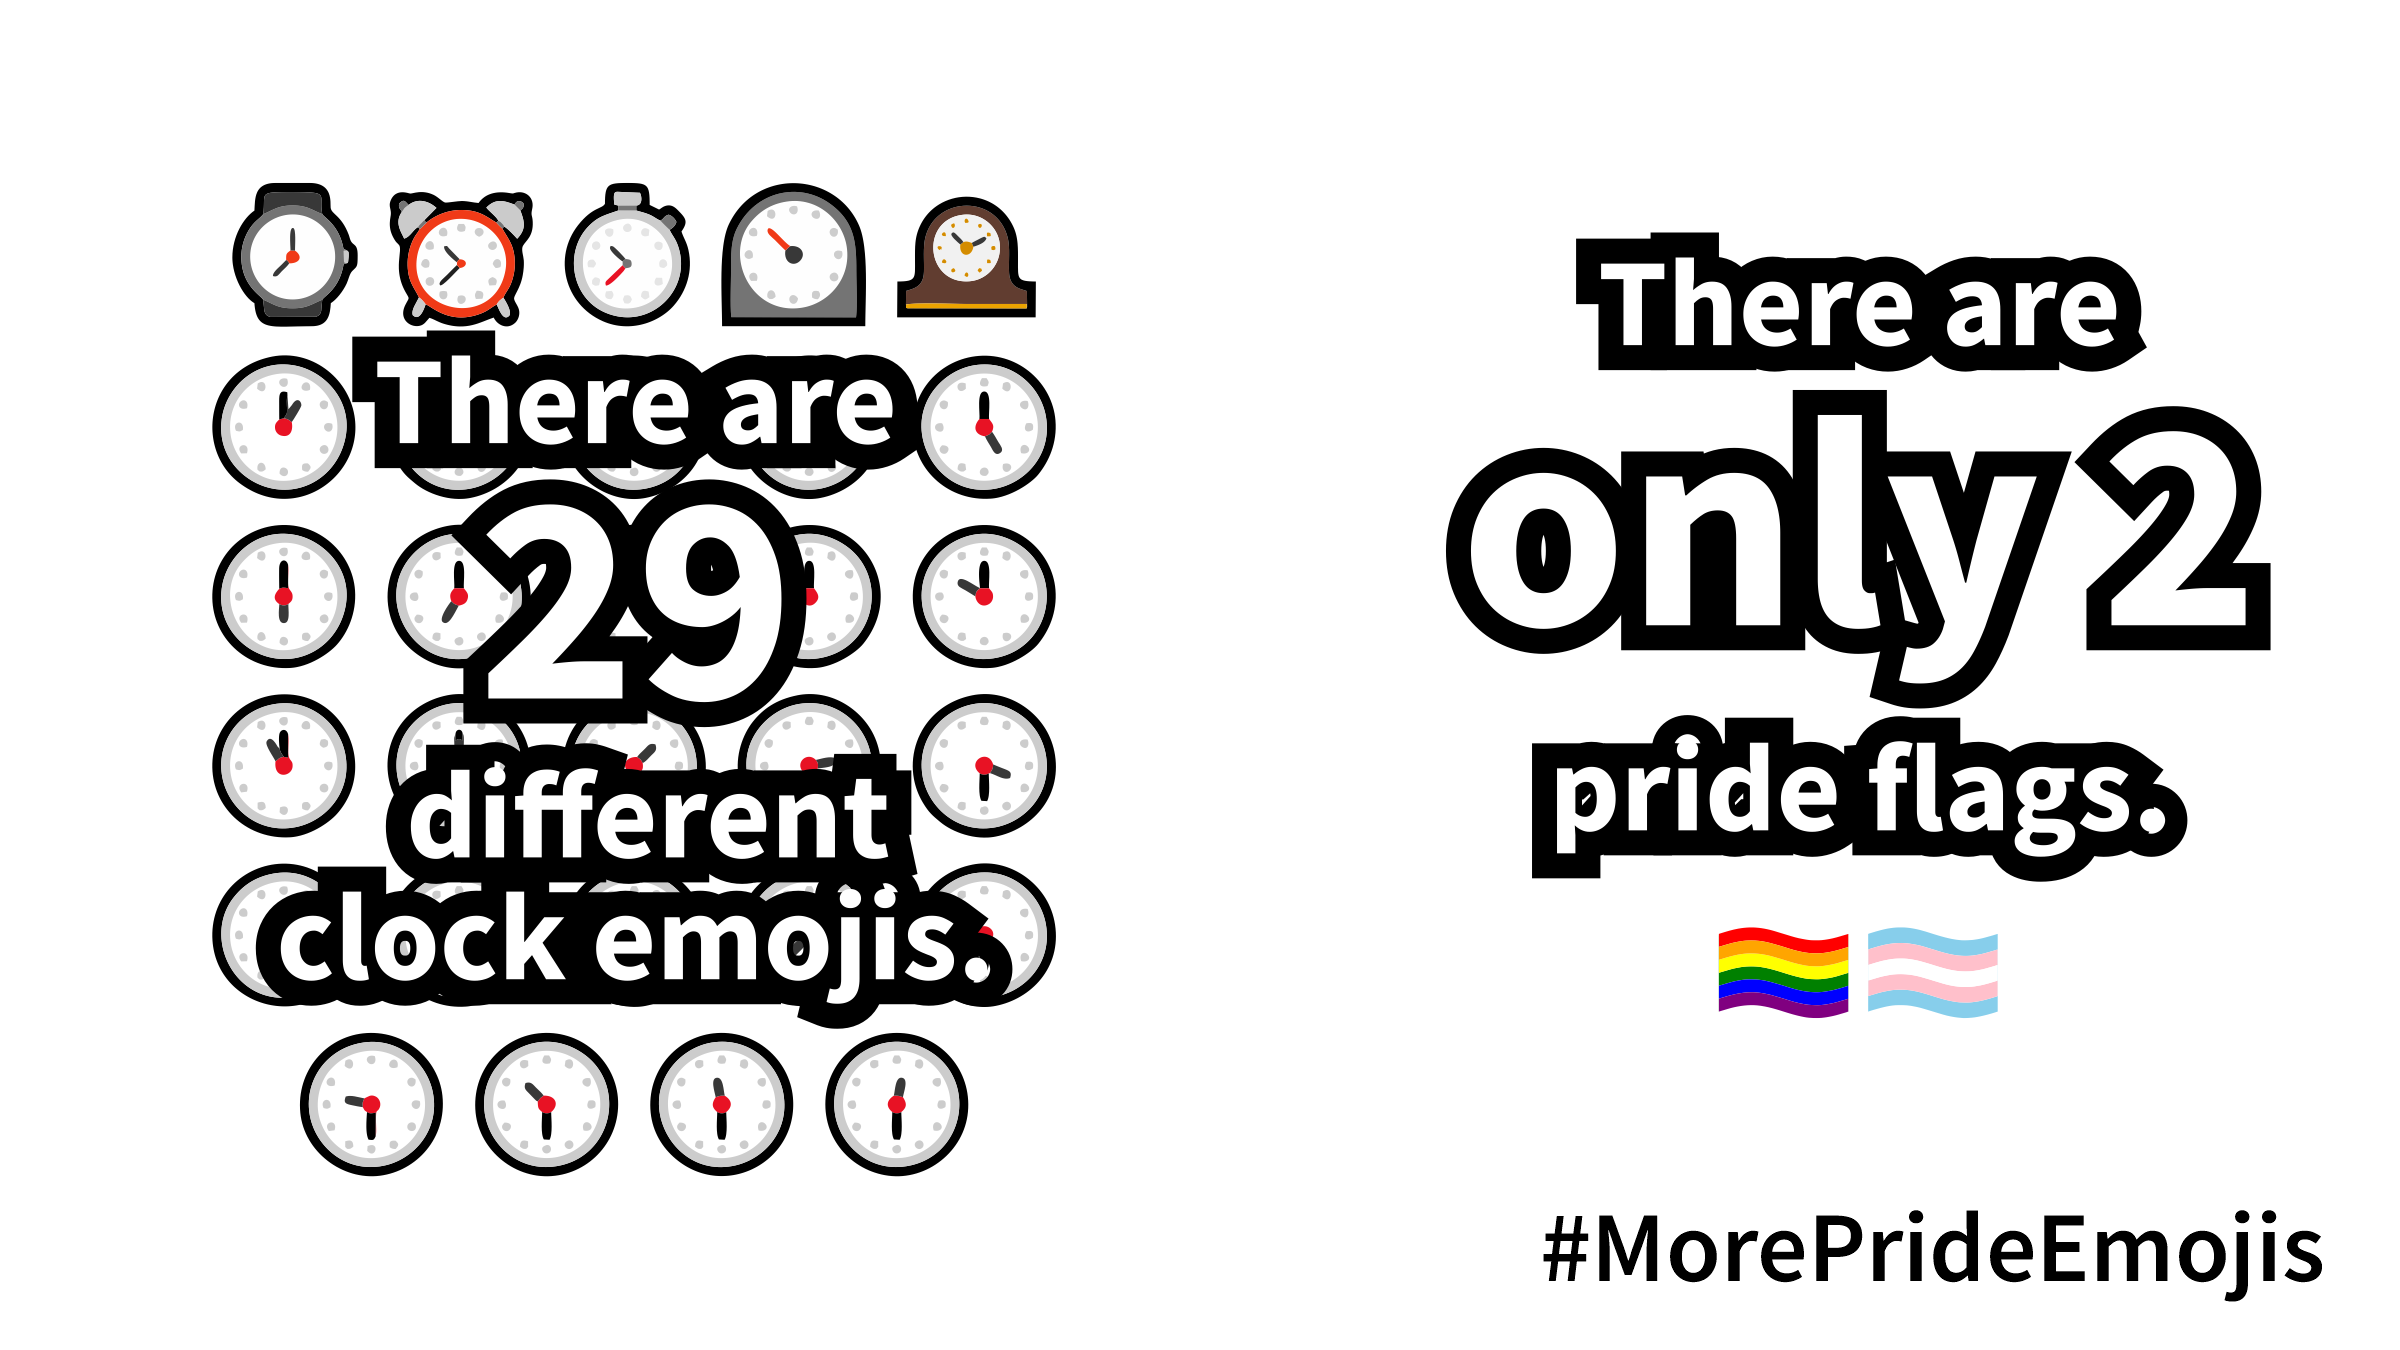 There are 29 different clock emoji and only 2 pride flag emoji